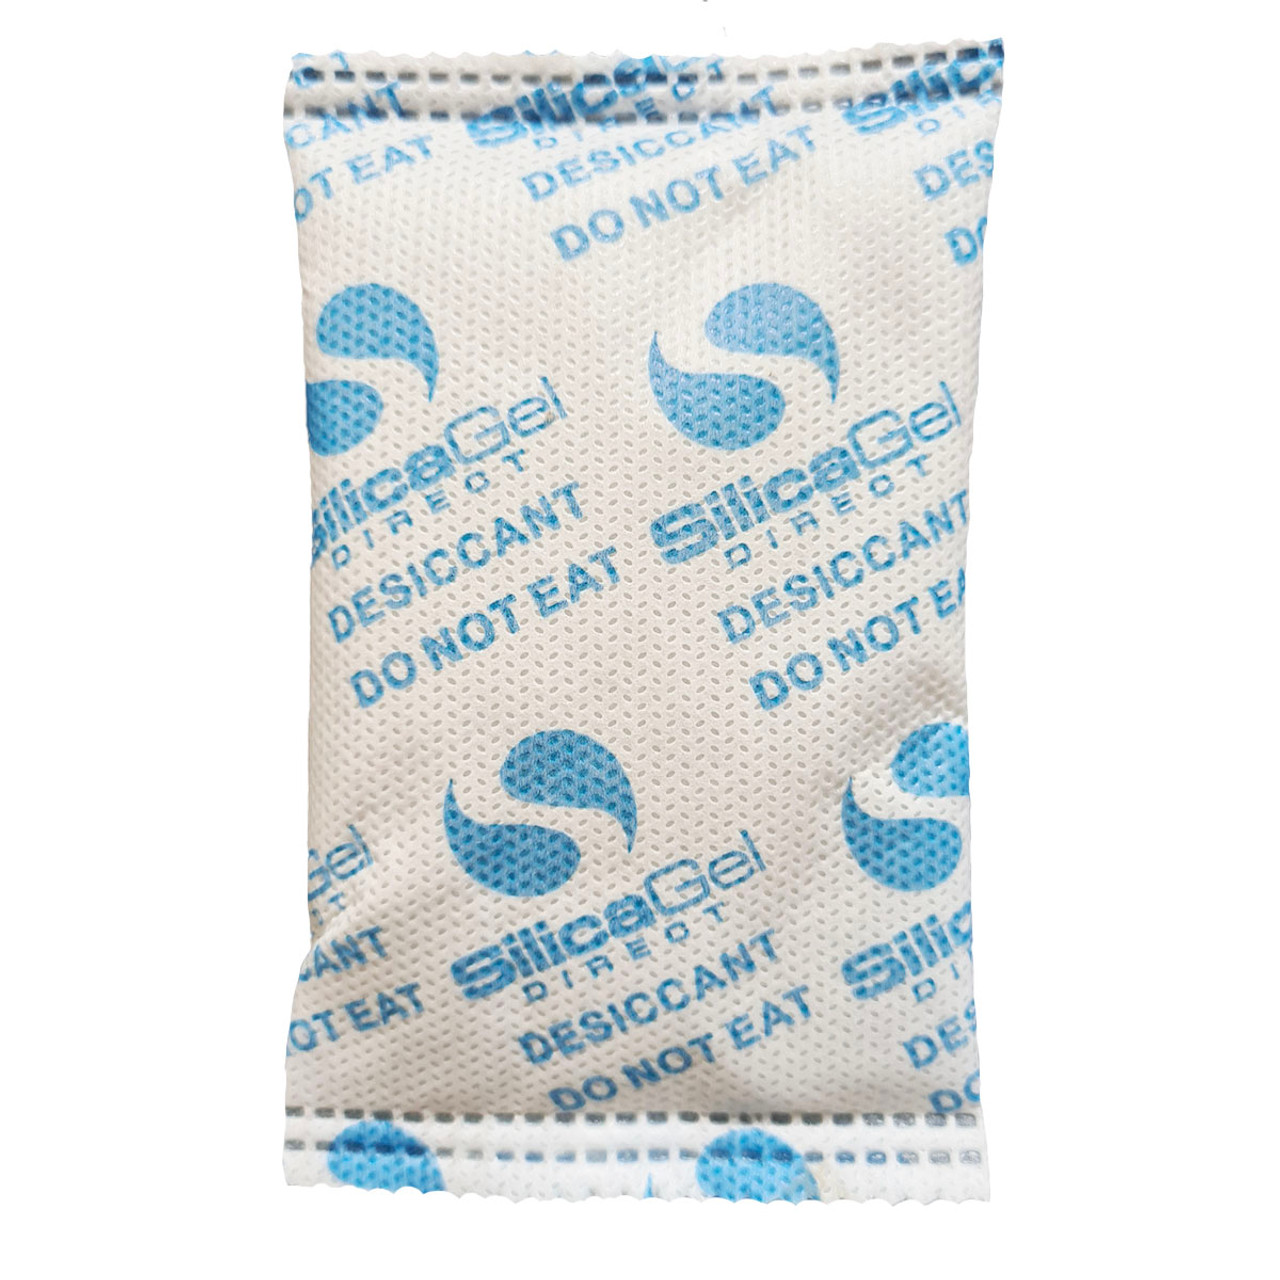 100gm Silica Gel Moisture Absorber Desiccant Packets (Non-Woven)